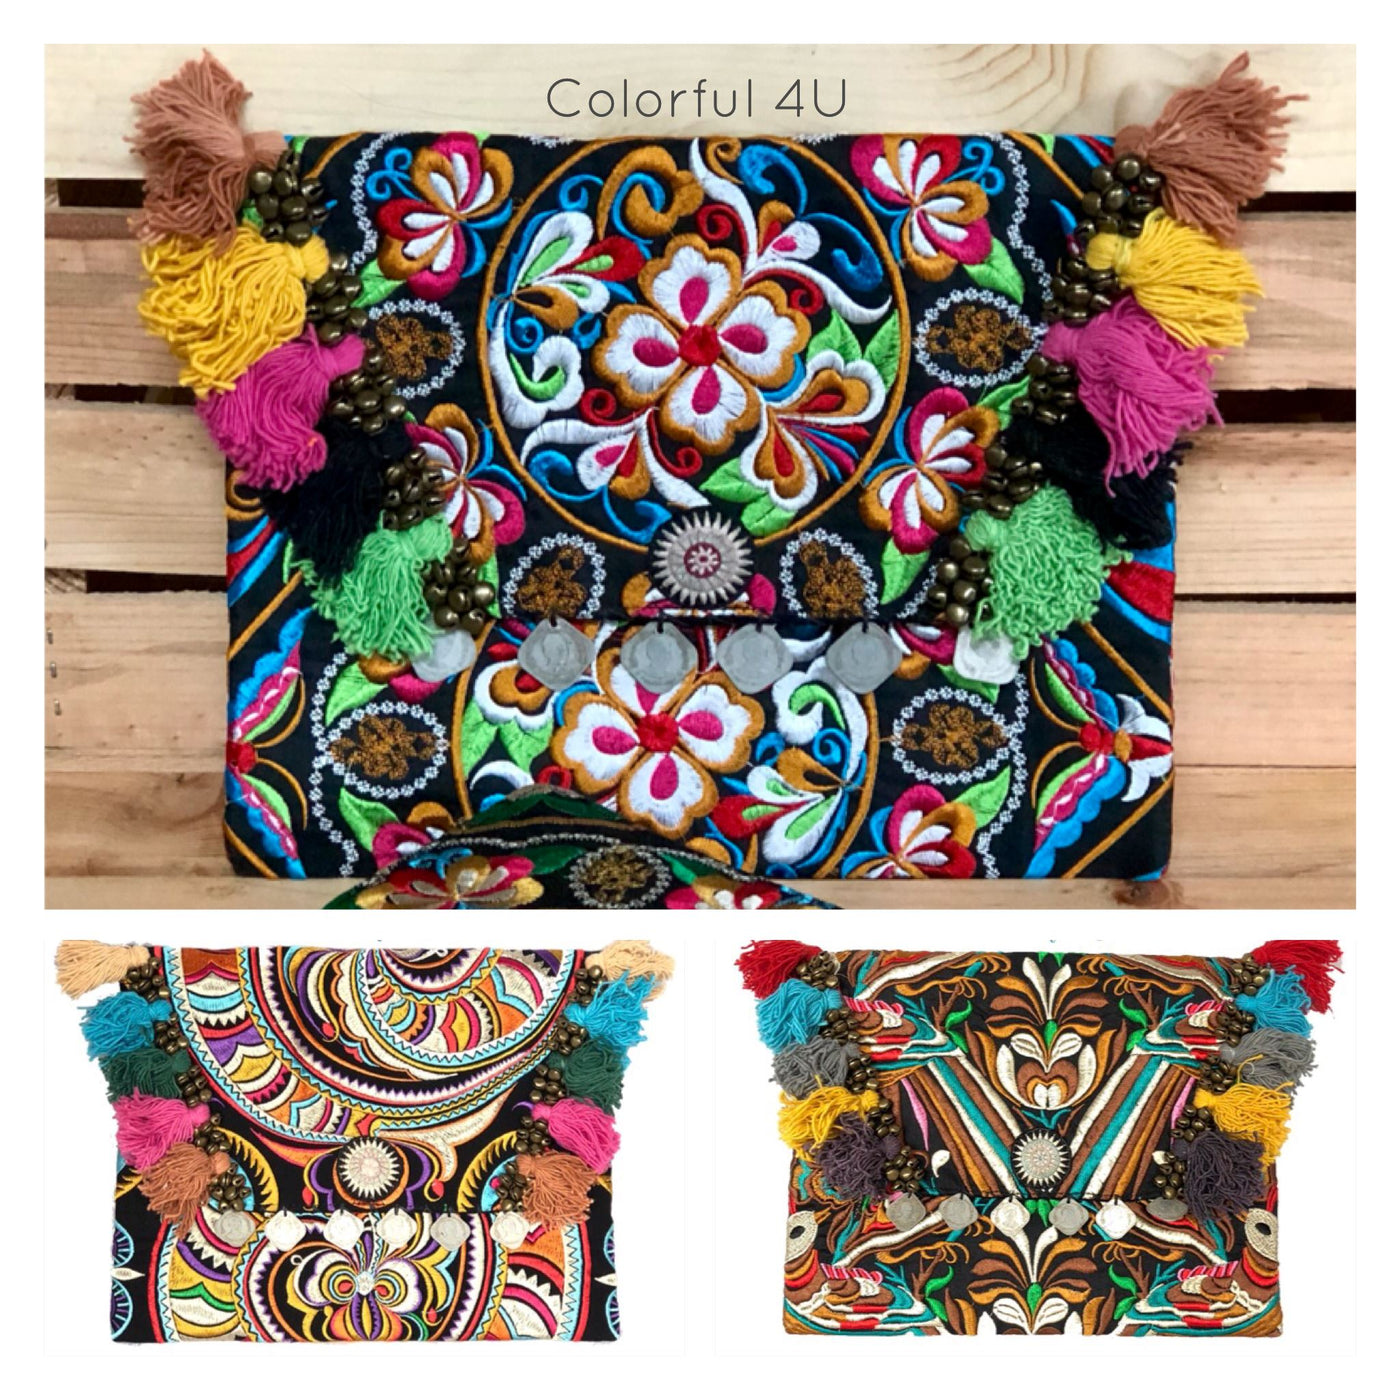 Colorful Embroidered Boho Clutch - Bohemian Black Embroidered Clutch Bag 